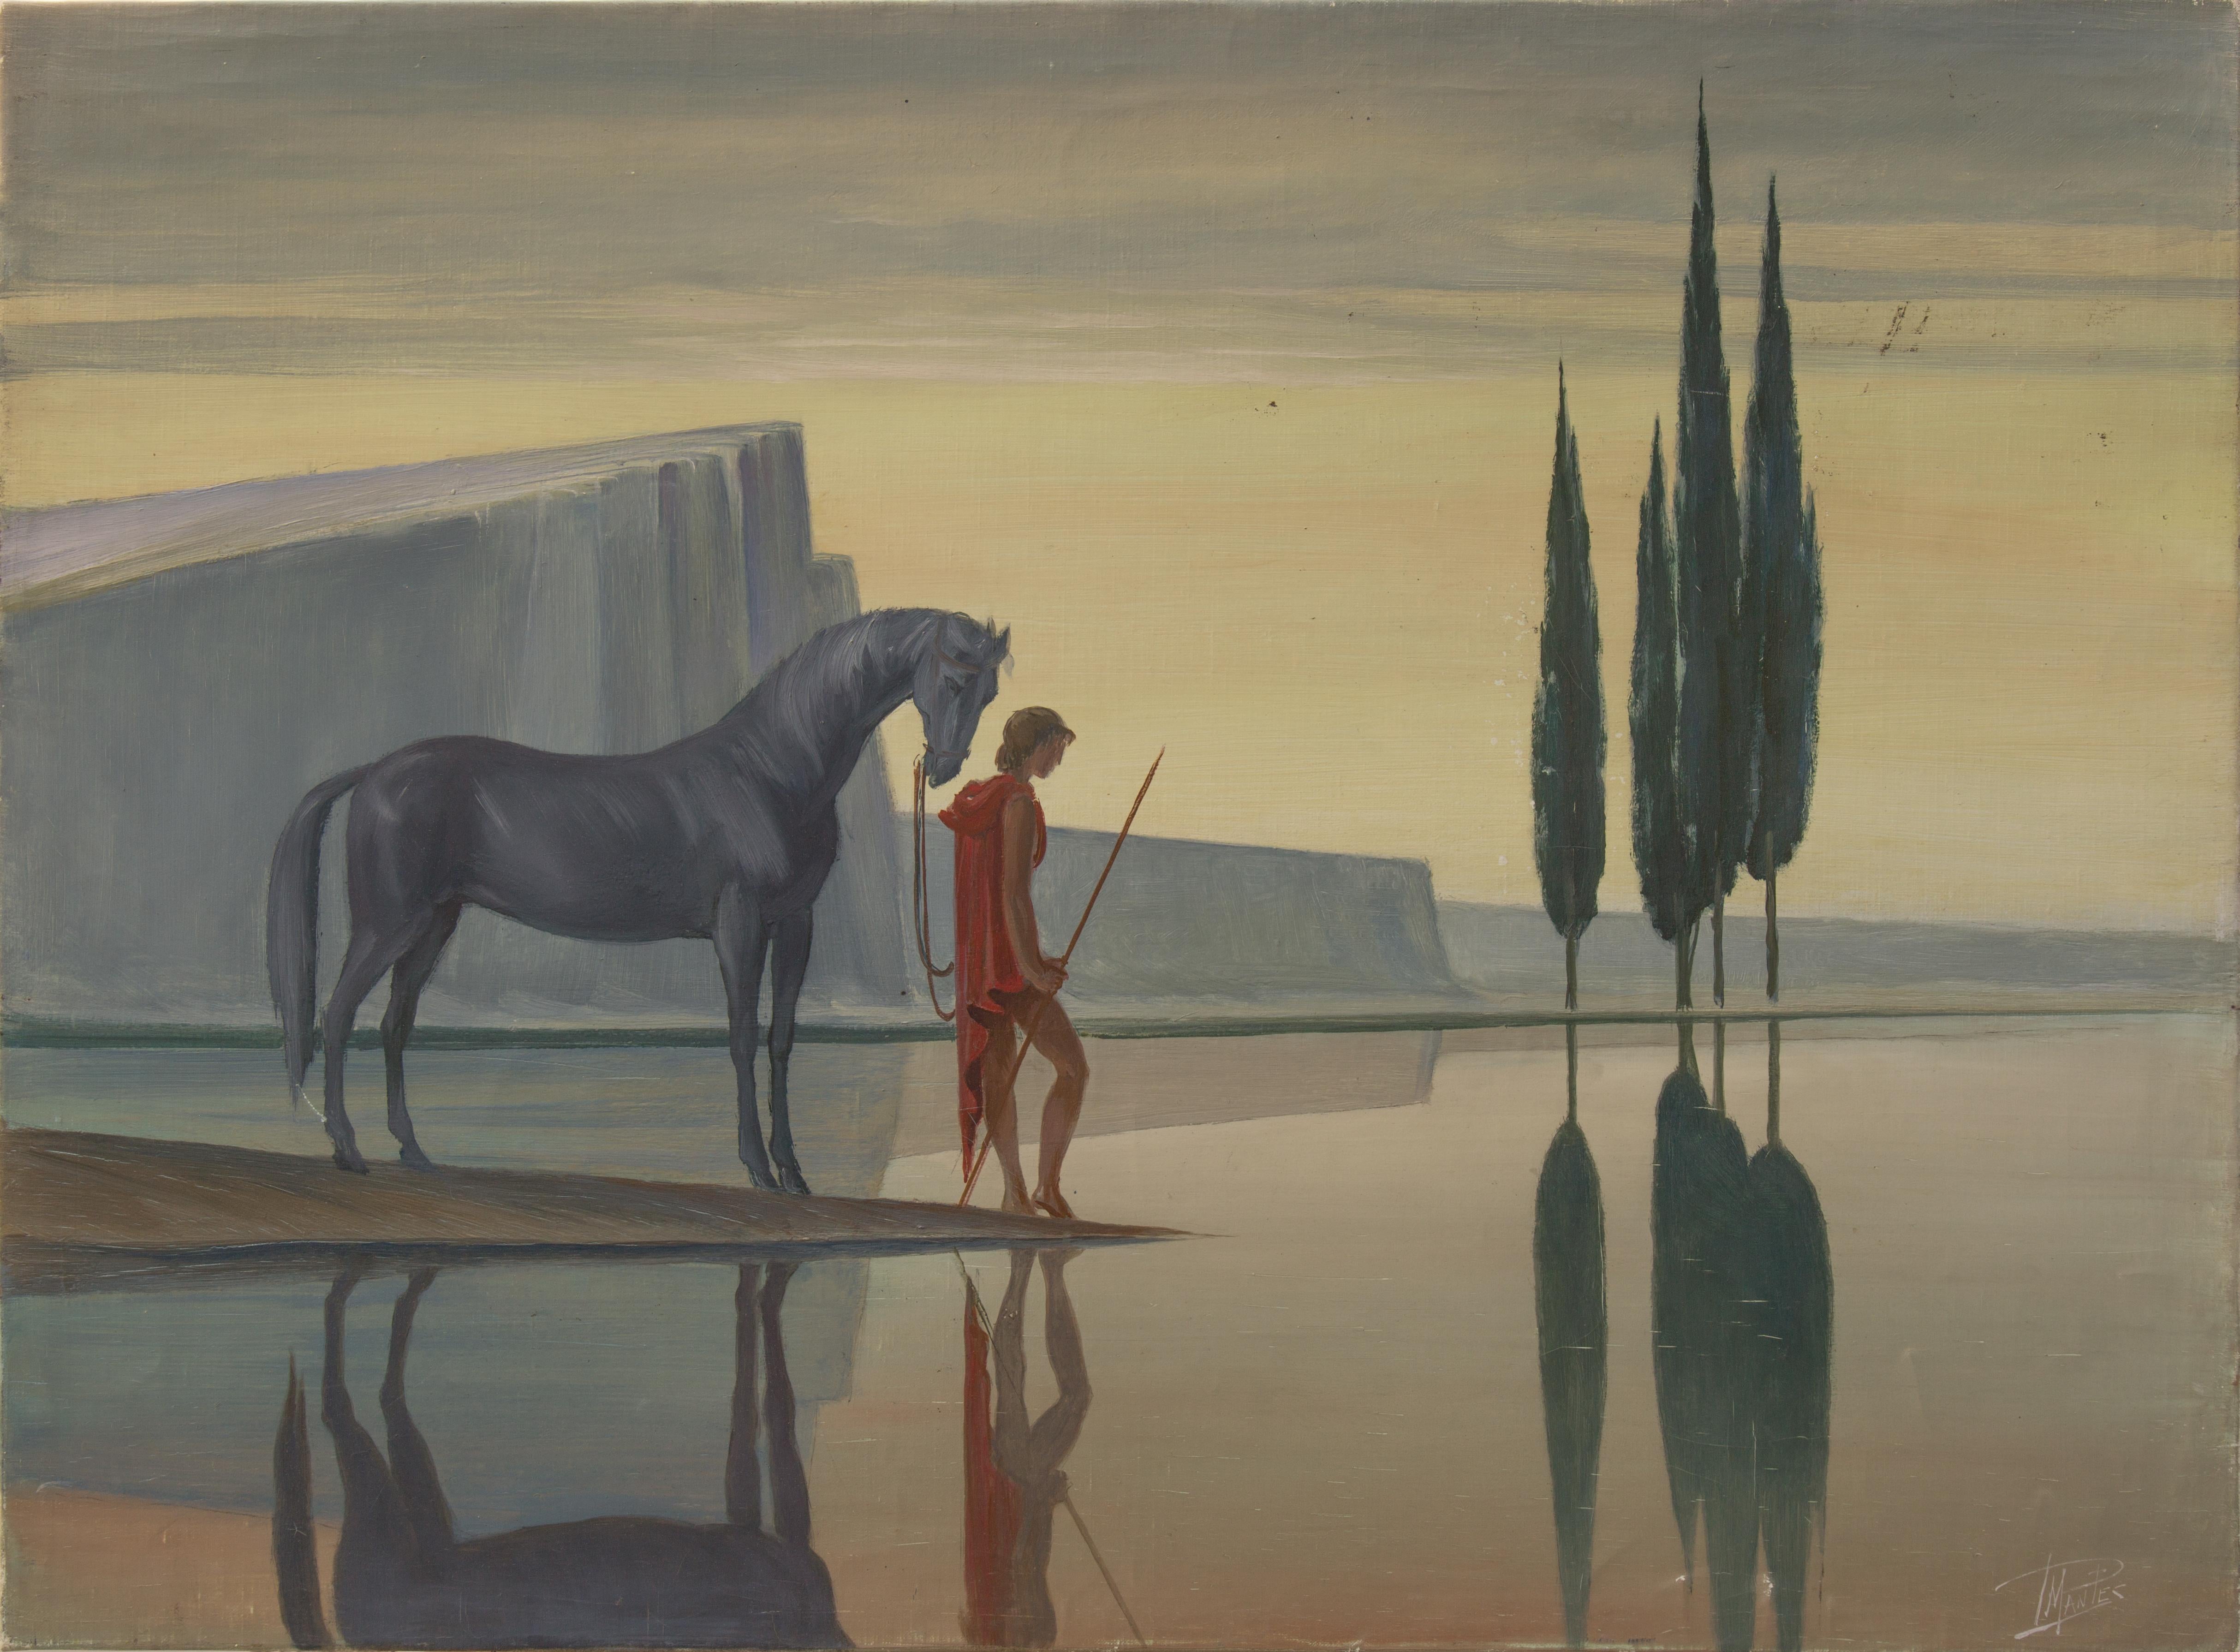 Paul Mantes Landscape Painting - The Rider. Metaphysical dreamlike scene of a Man and a Horse at the edge of Lake